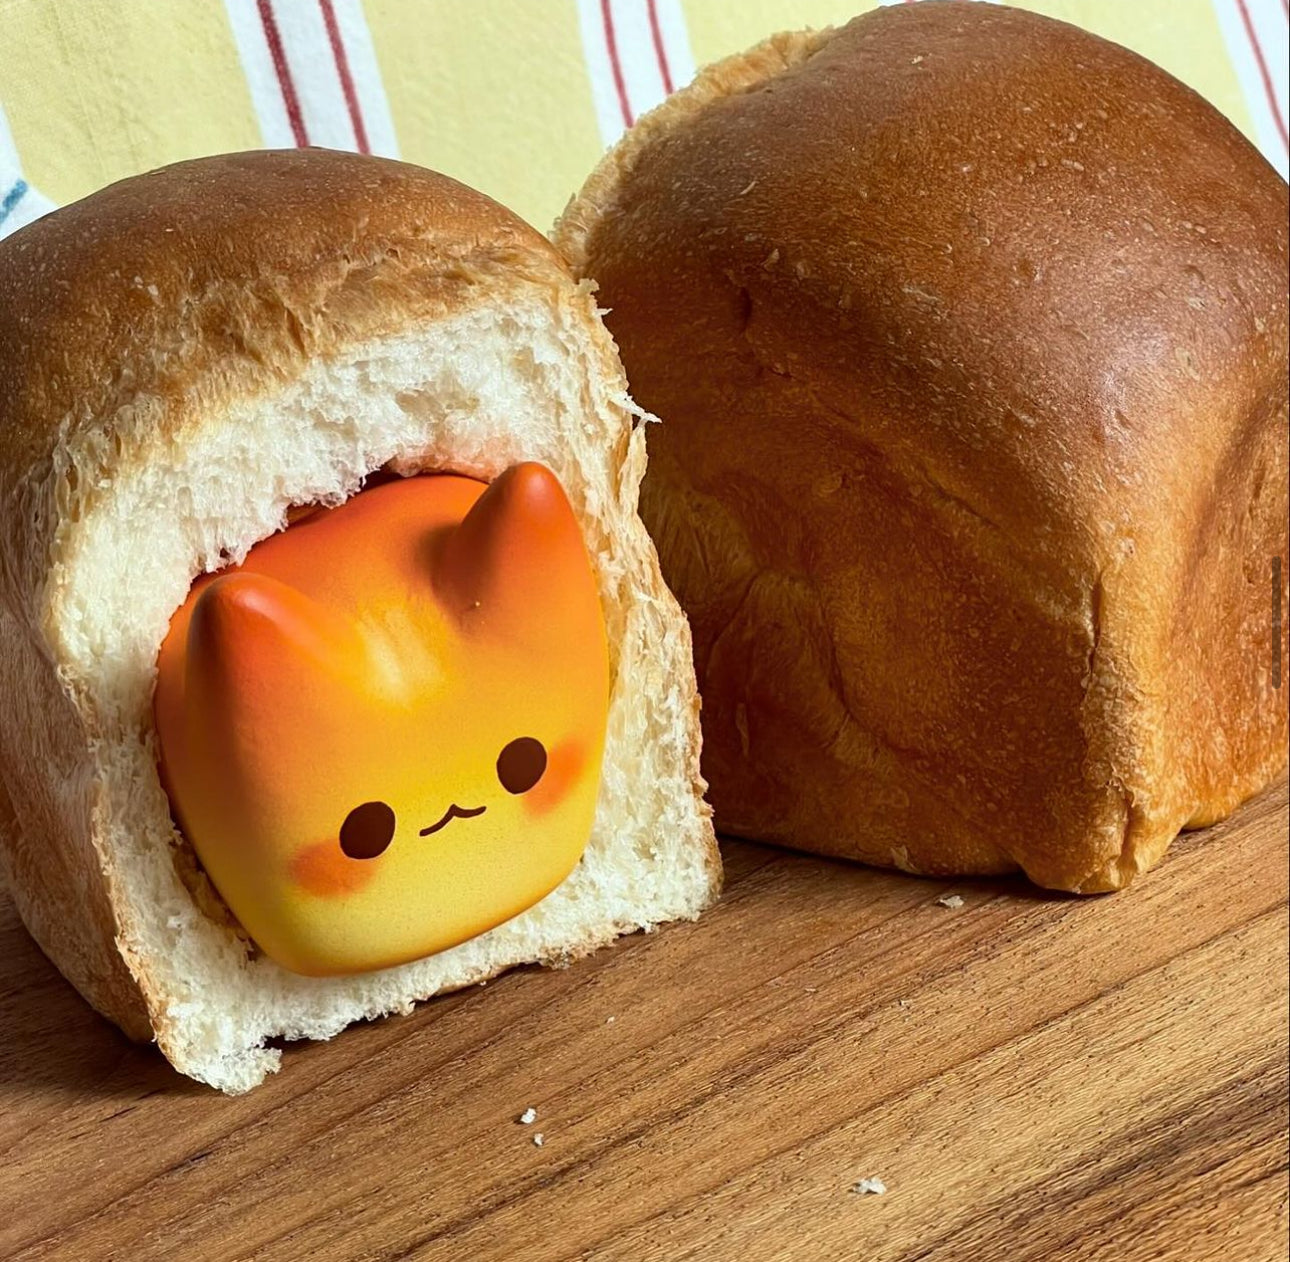 Bread Cat and Baby Bread set by Rato Kim - Preorder